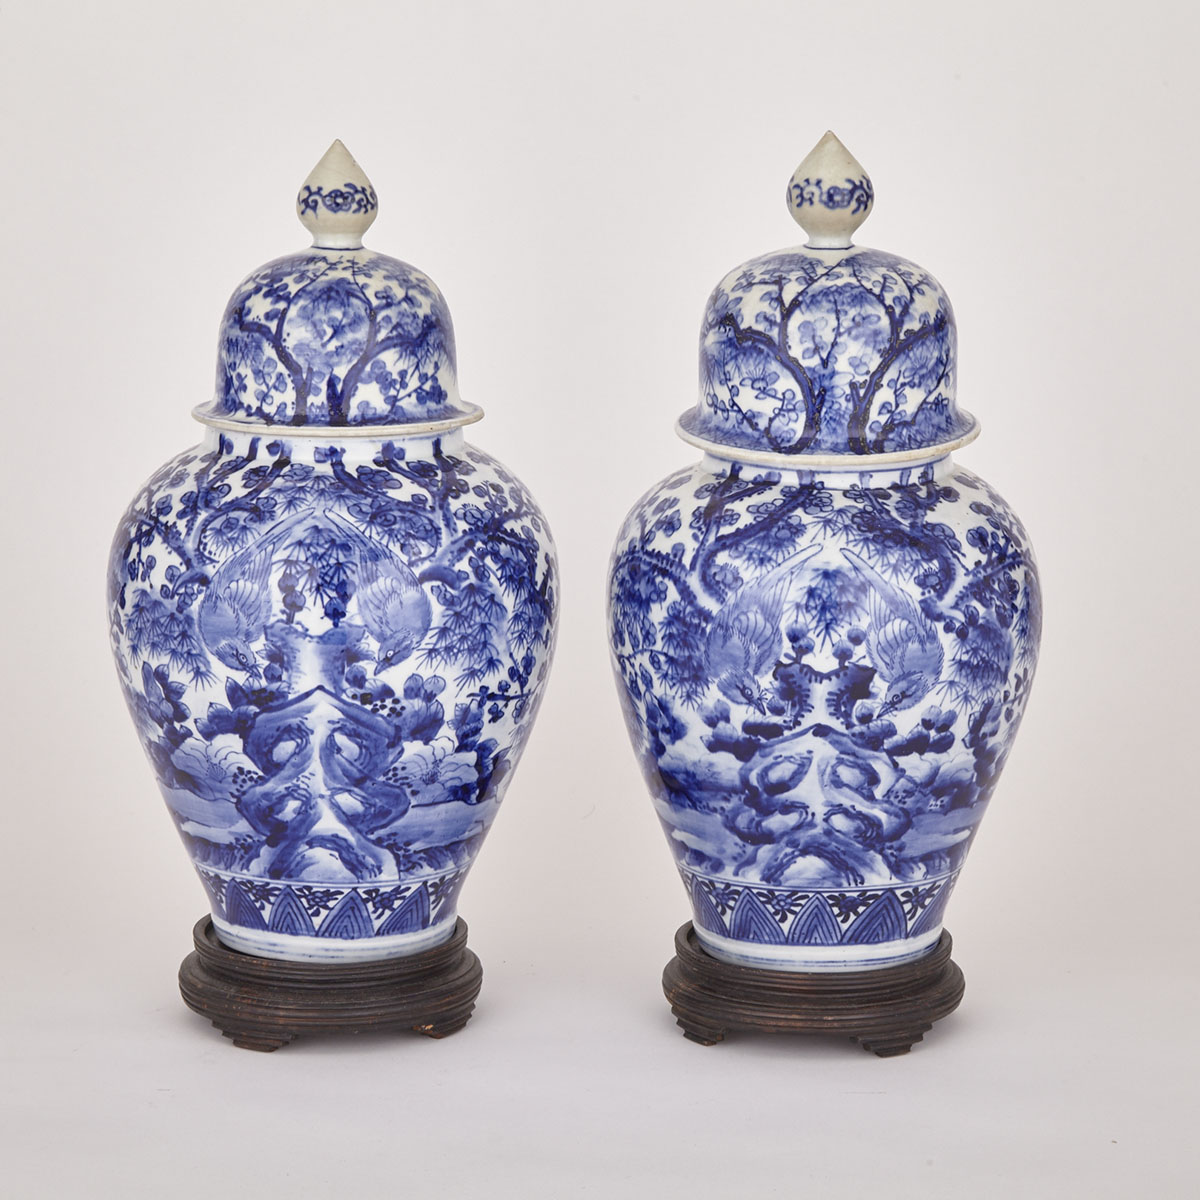 Pair of Chinese Blue and White Export Porcelain Ginger Jars, 19th/early 20th century